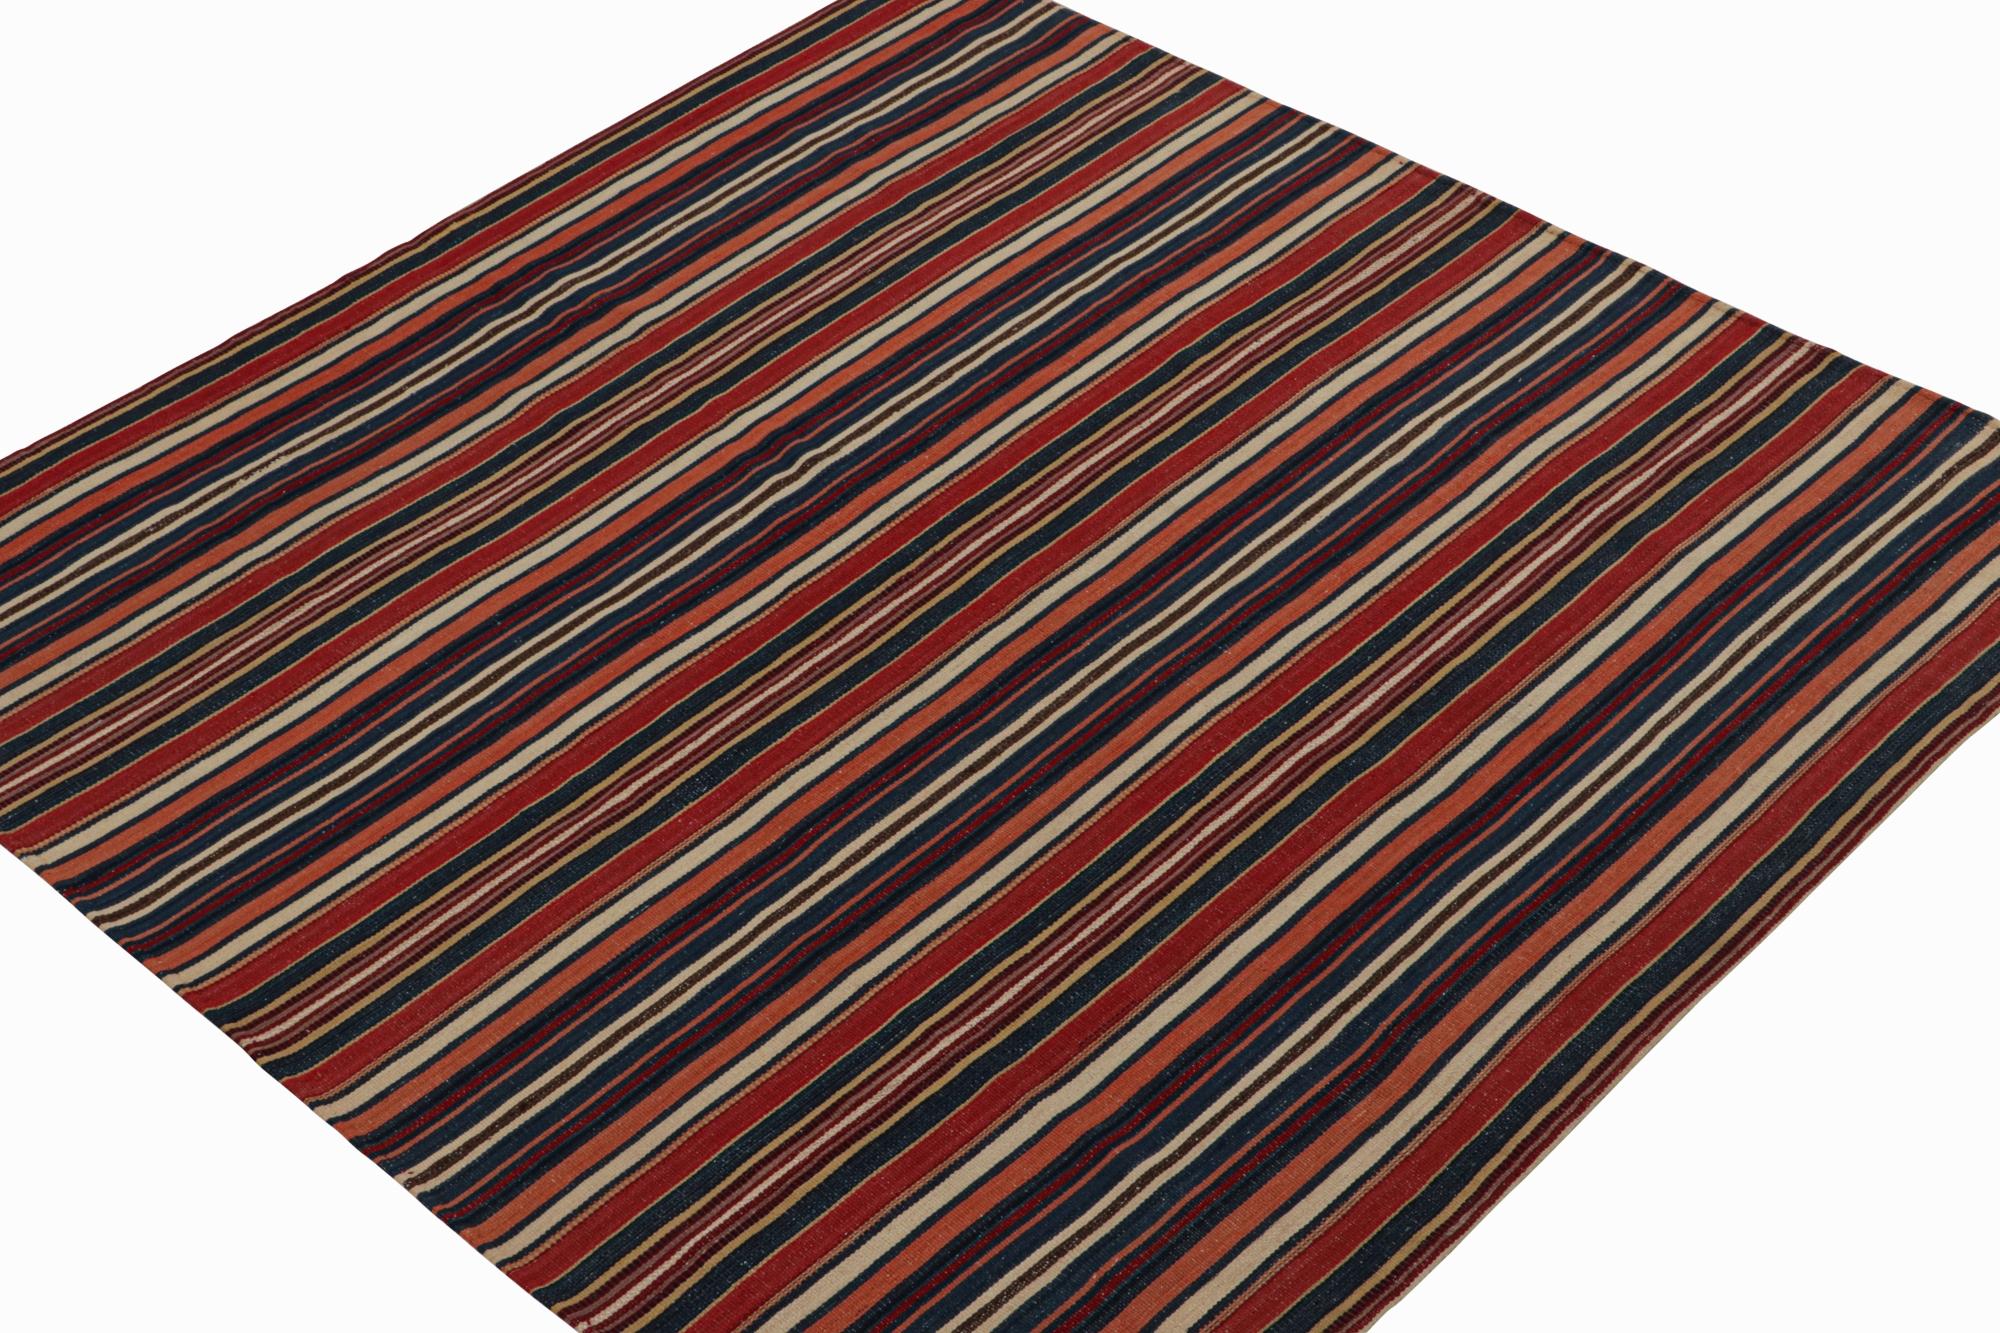 This vintage 7x7 Persian Kilim is handwoven in wool, and originates circa 1950-1960.

On the Design: 

This flat weave carries stripes in a repeat all over pattern with rich red, beige and brown tones. Keen eyes may note salmon and navy blue